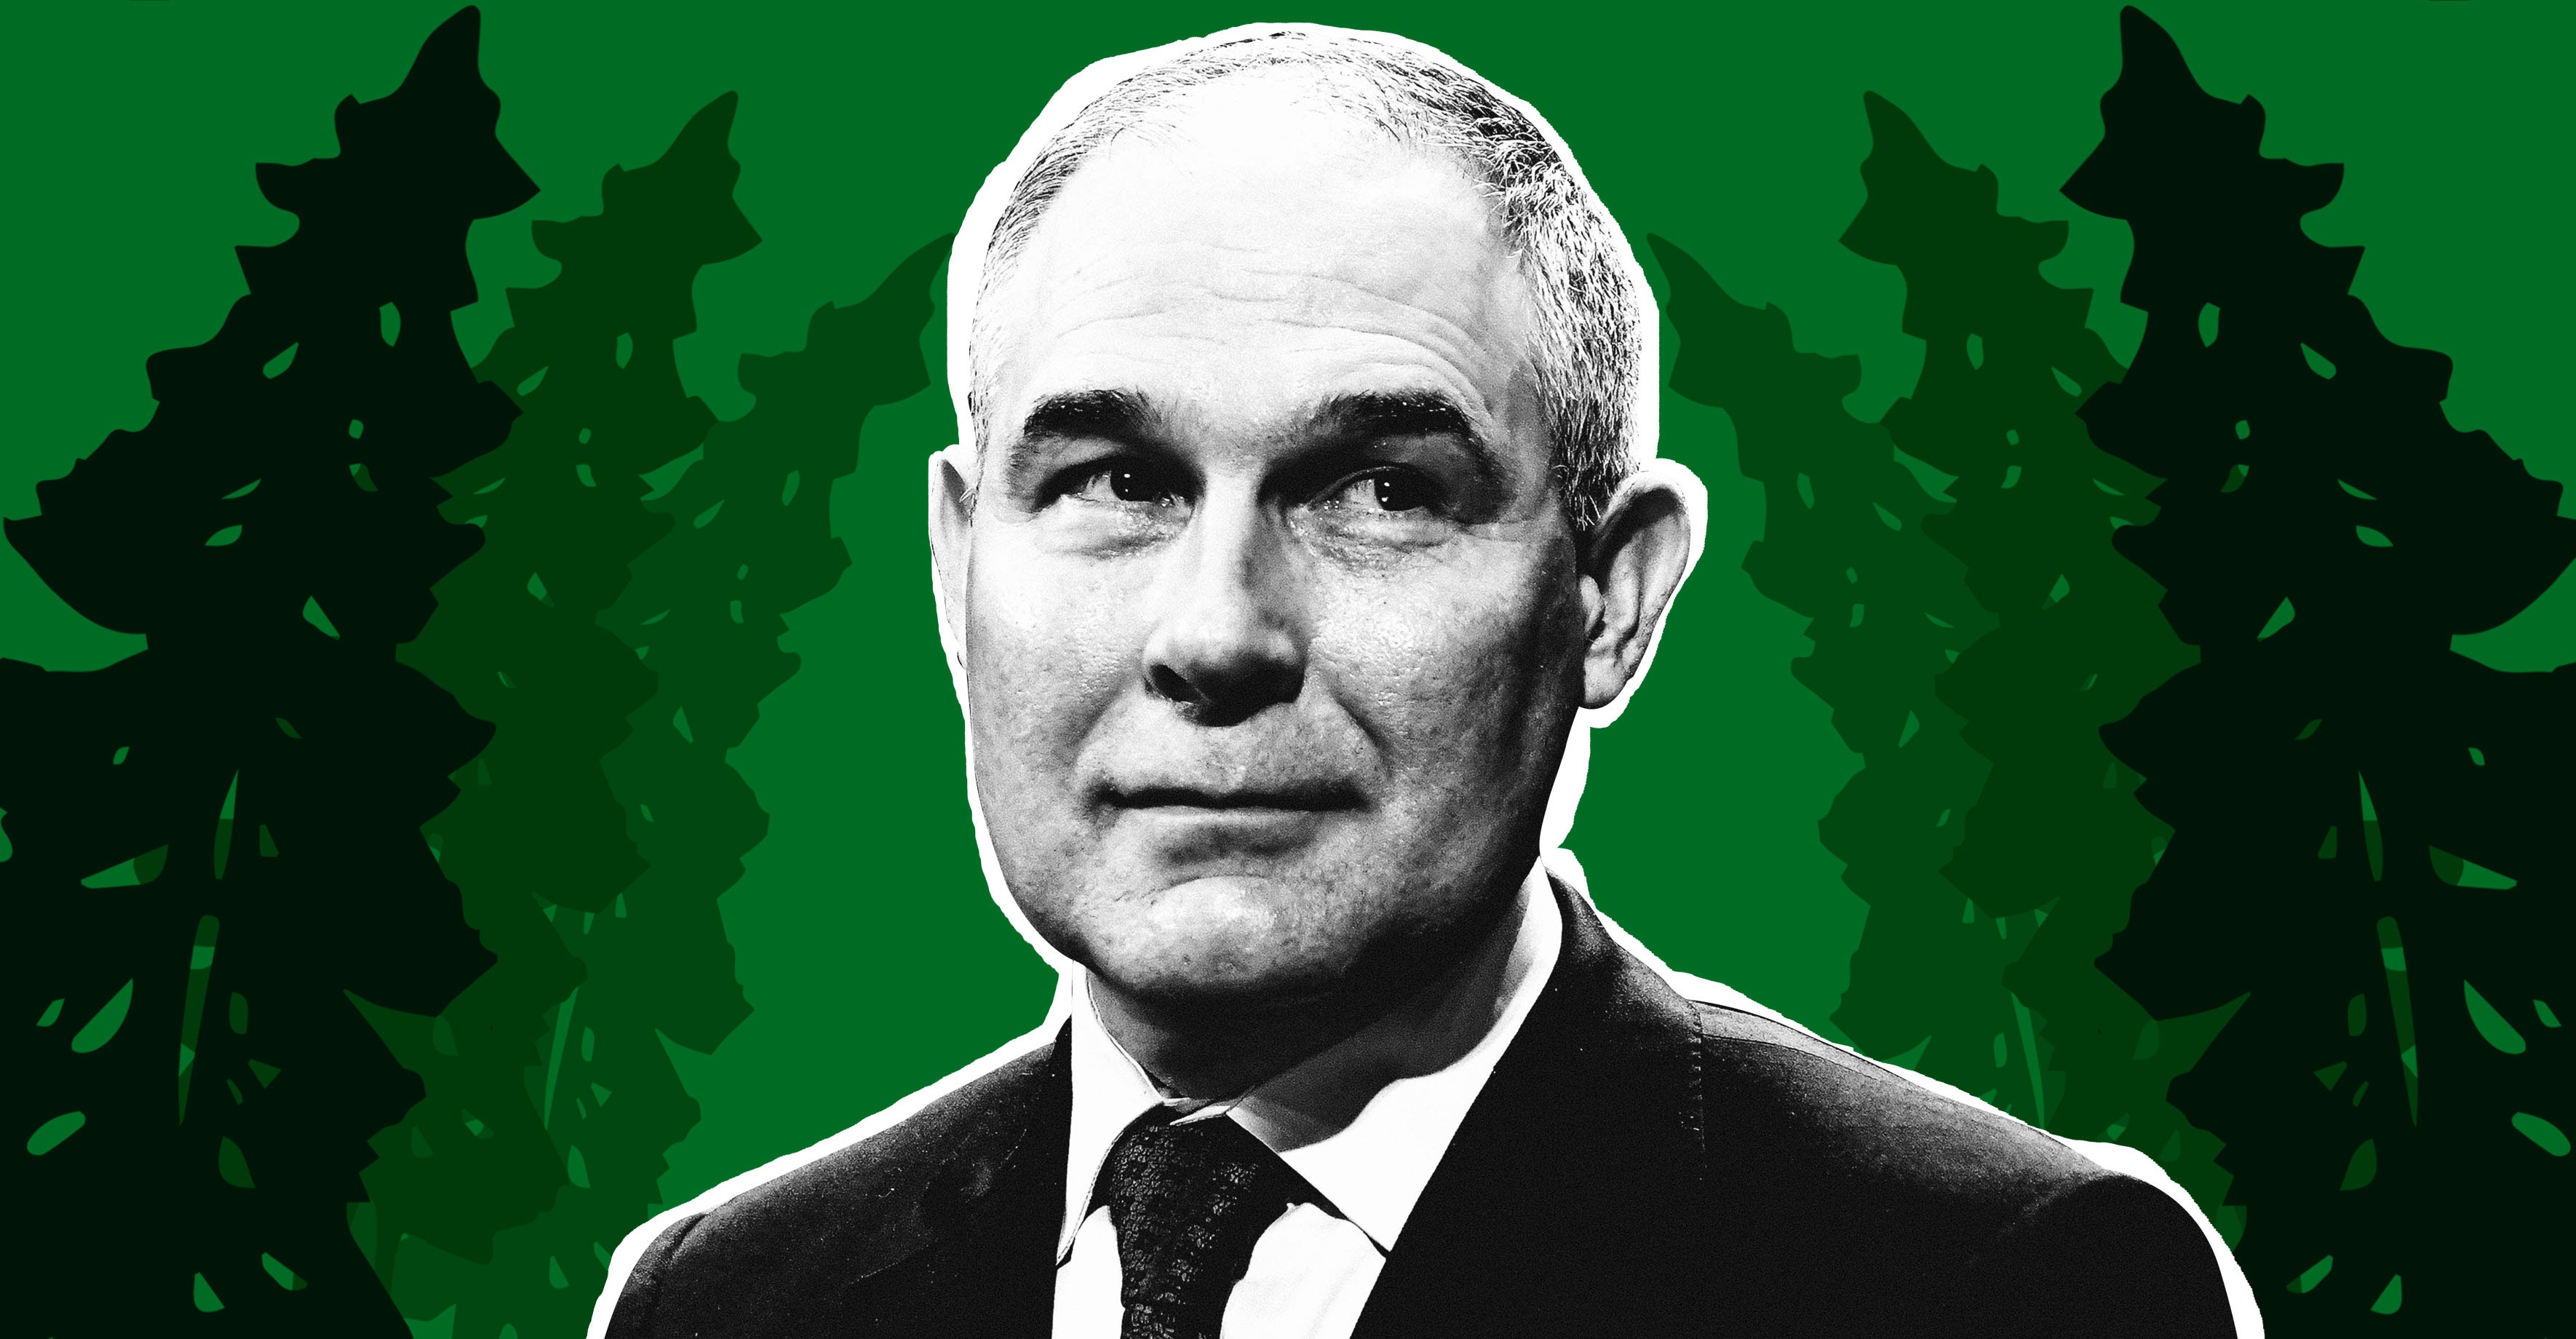 Scott Pruitt with some trees in background.